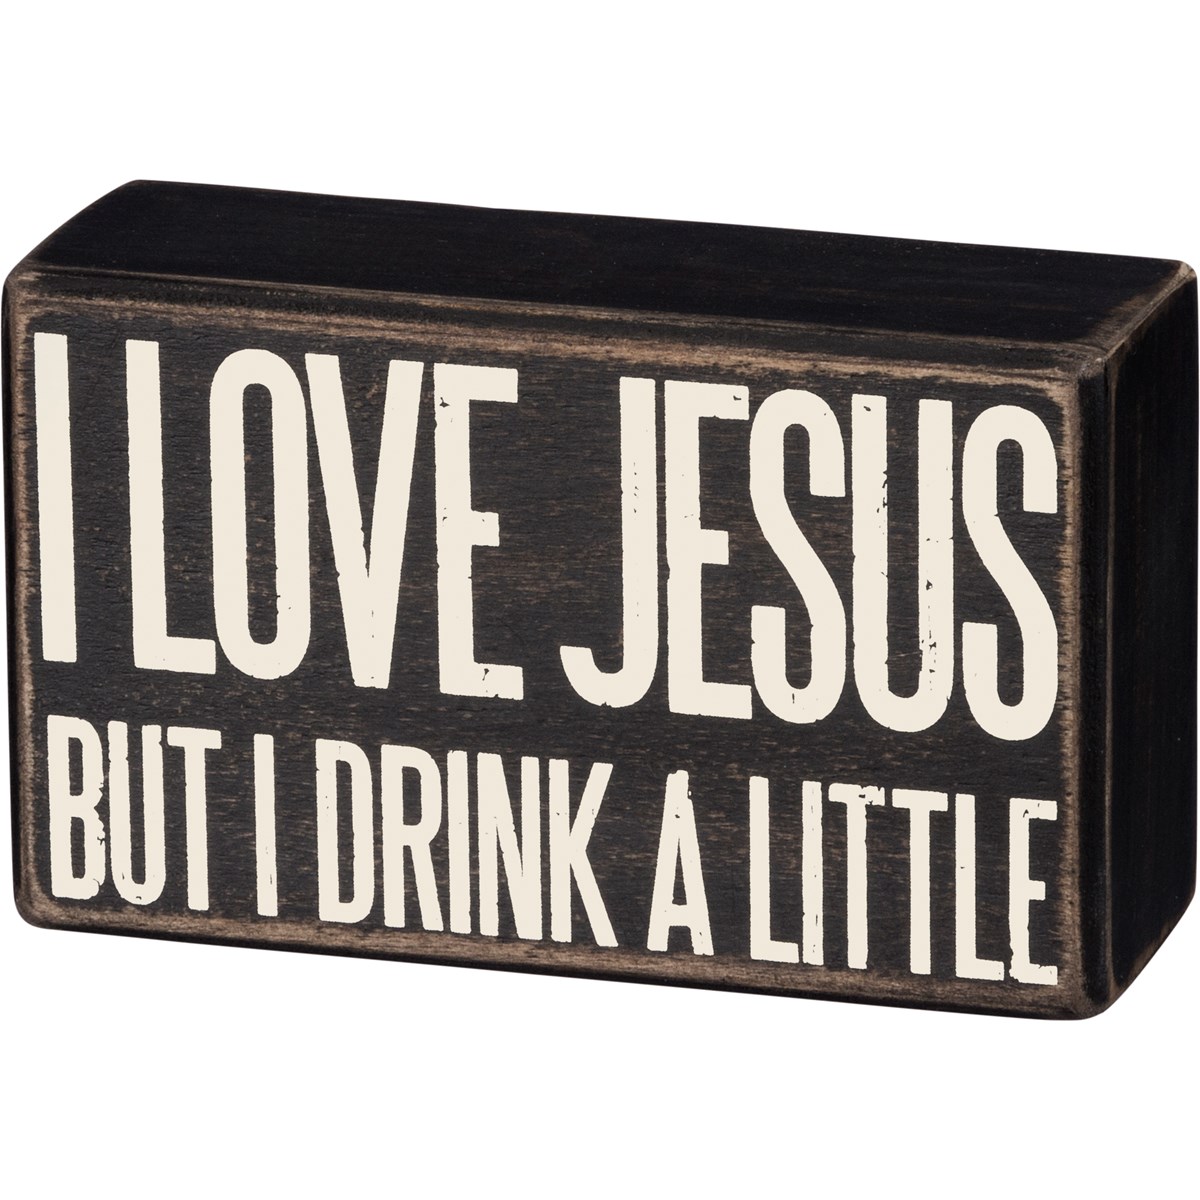 Drink A Little Box Sign - Wood 